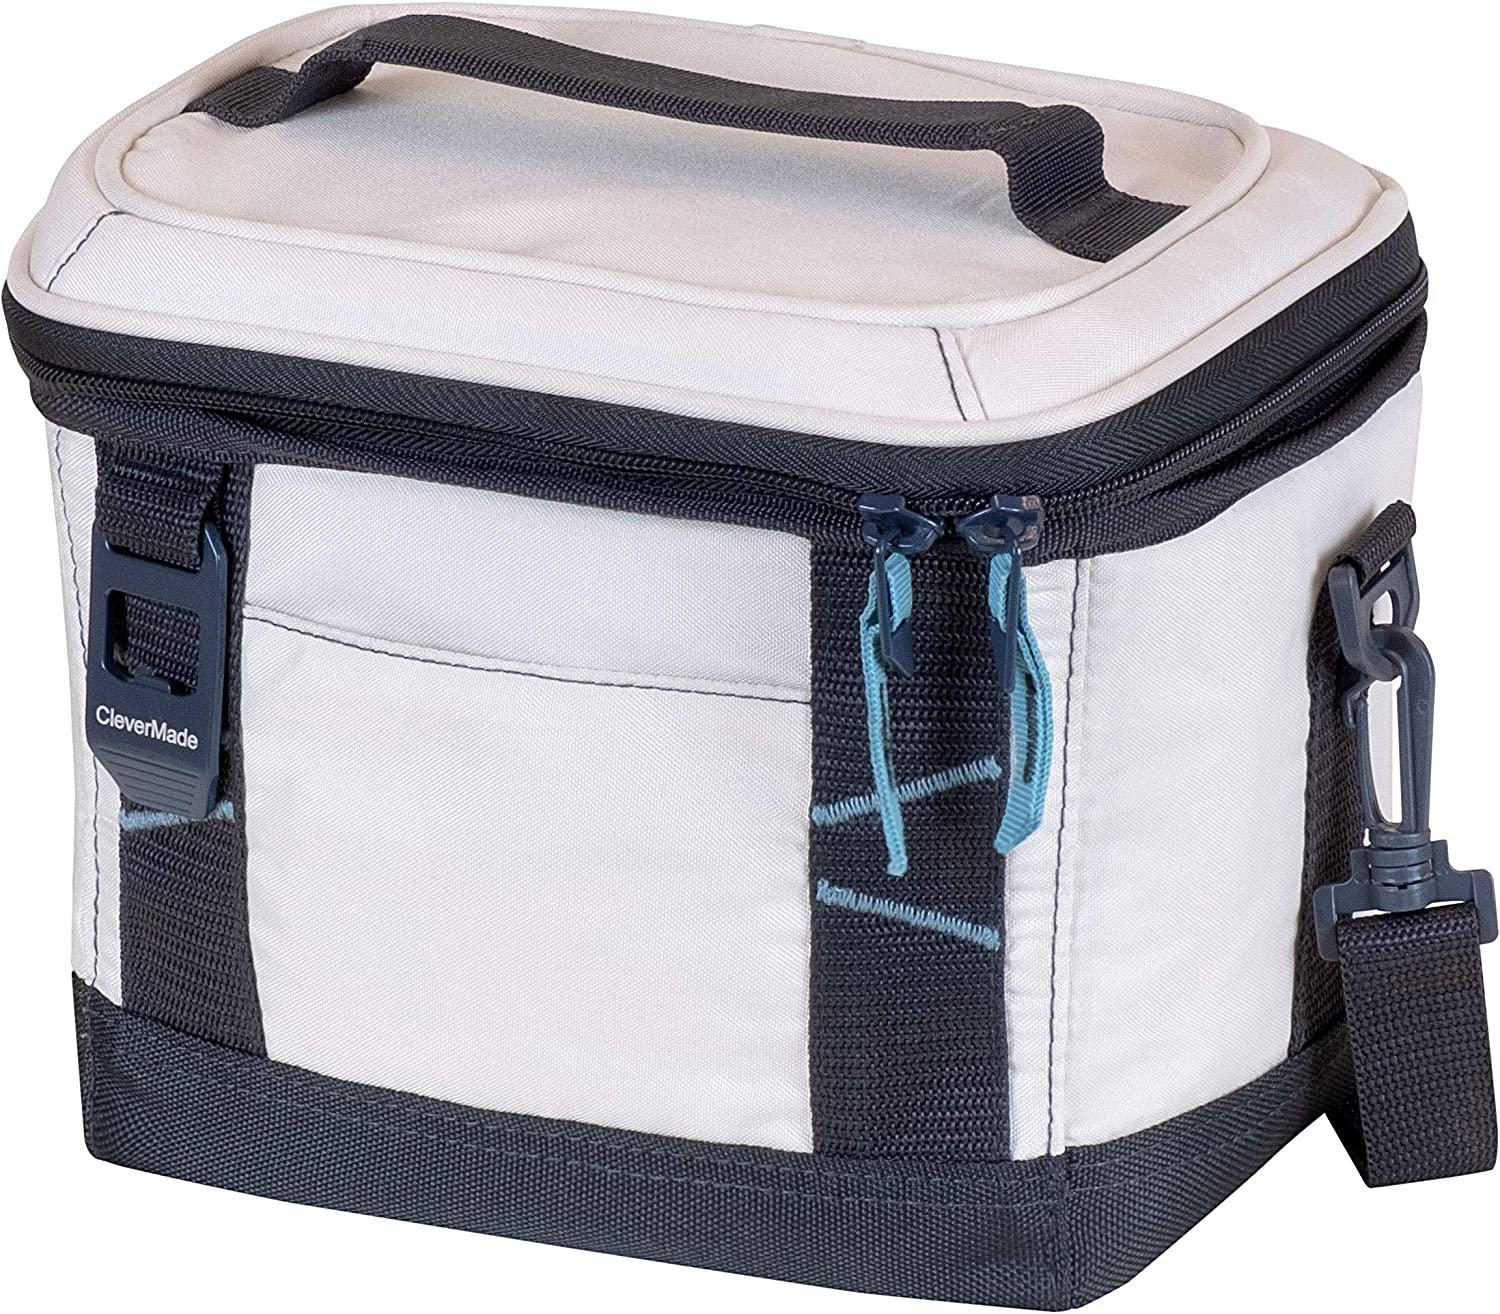 CleverMade Collapsible Soft Insulated Cooler Bag Tote for $14.88